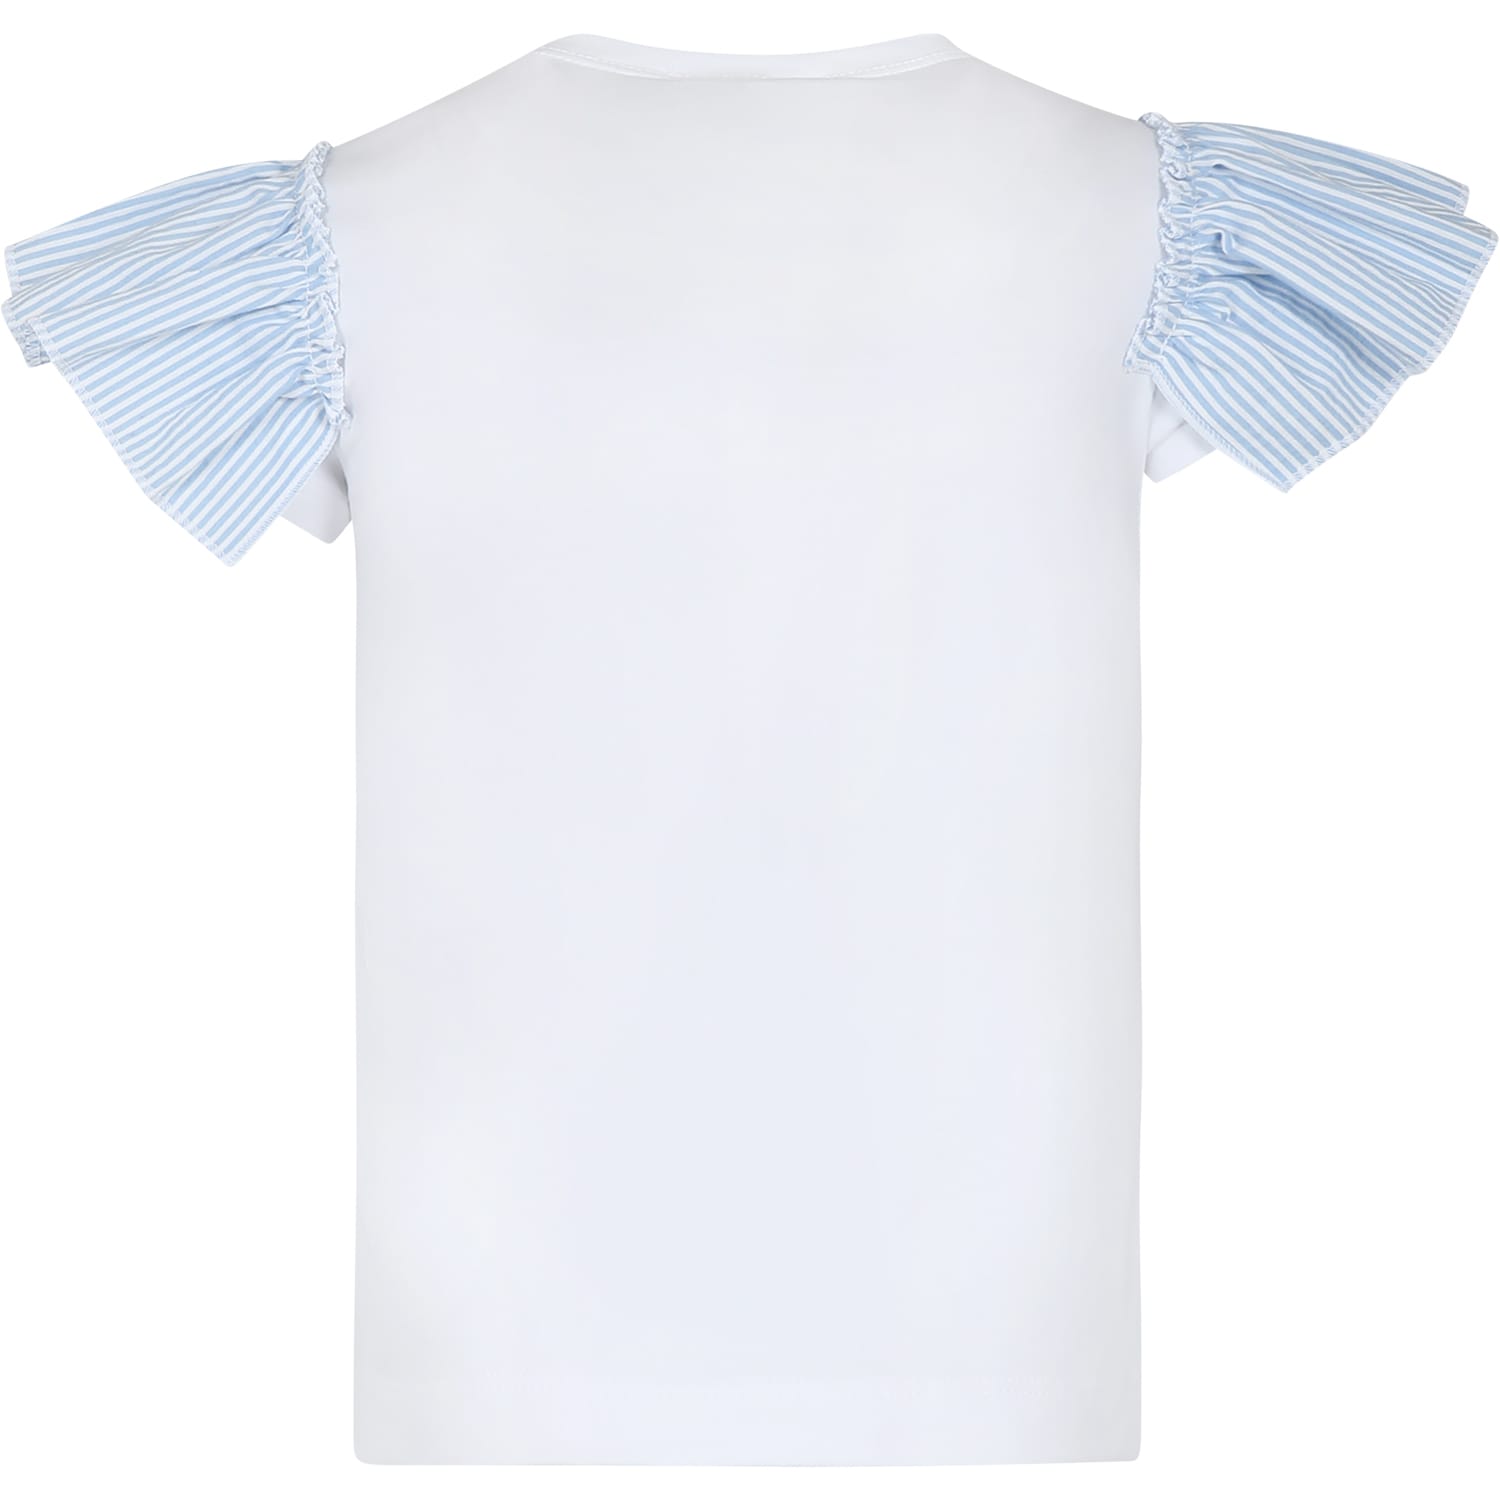 Shop Monnalisa White T-shirt For Girl With Light Blue Hearts